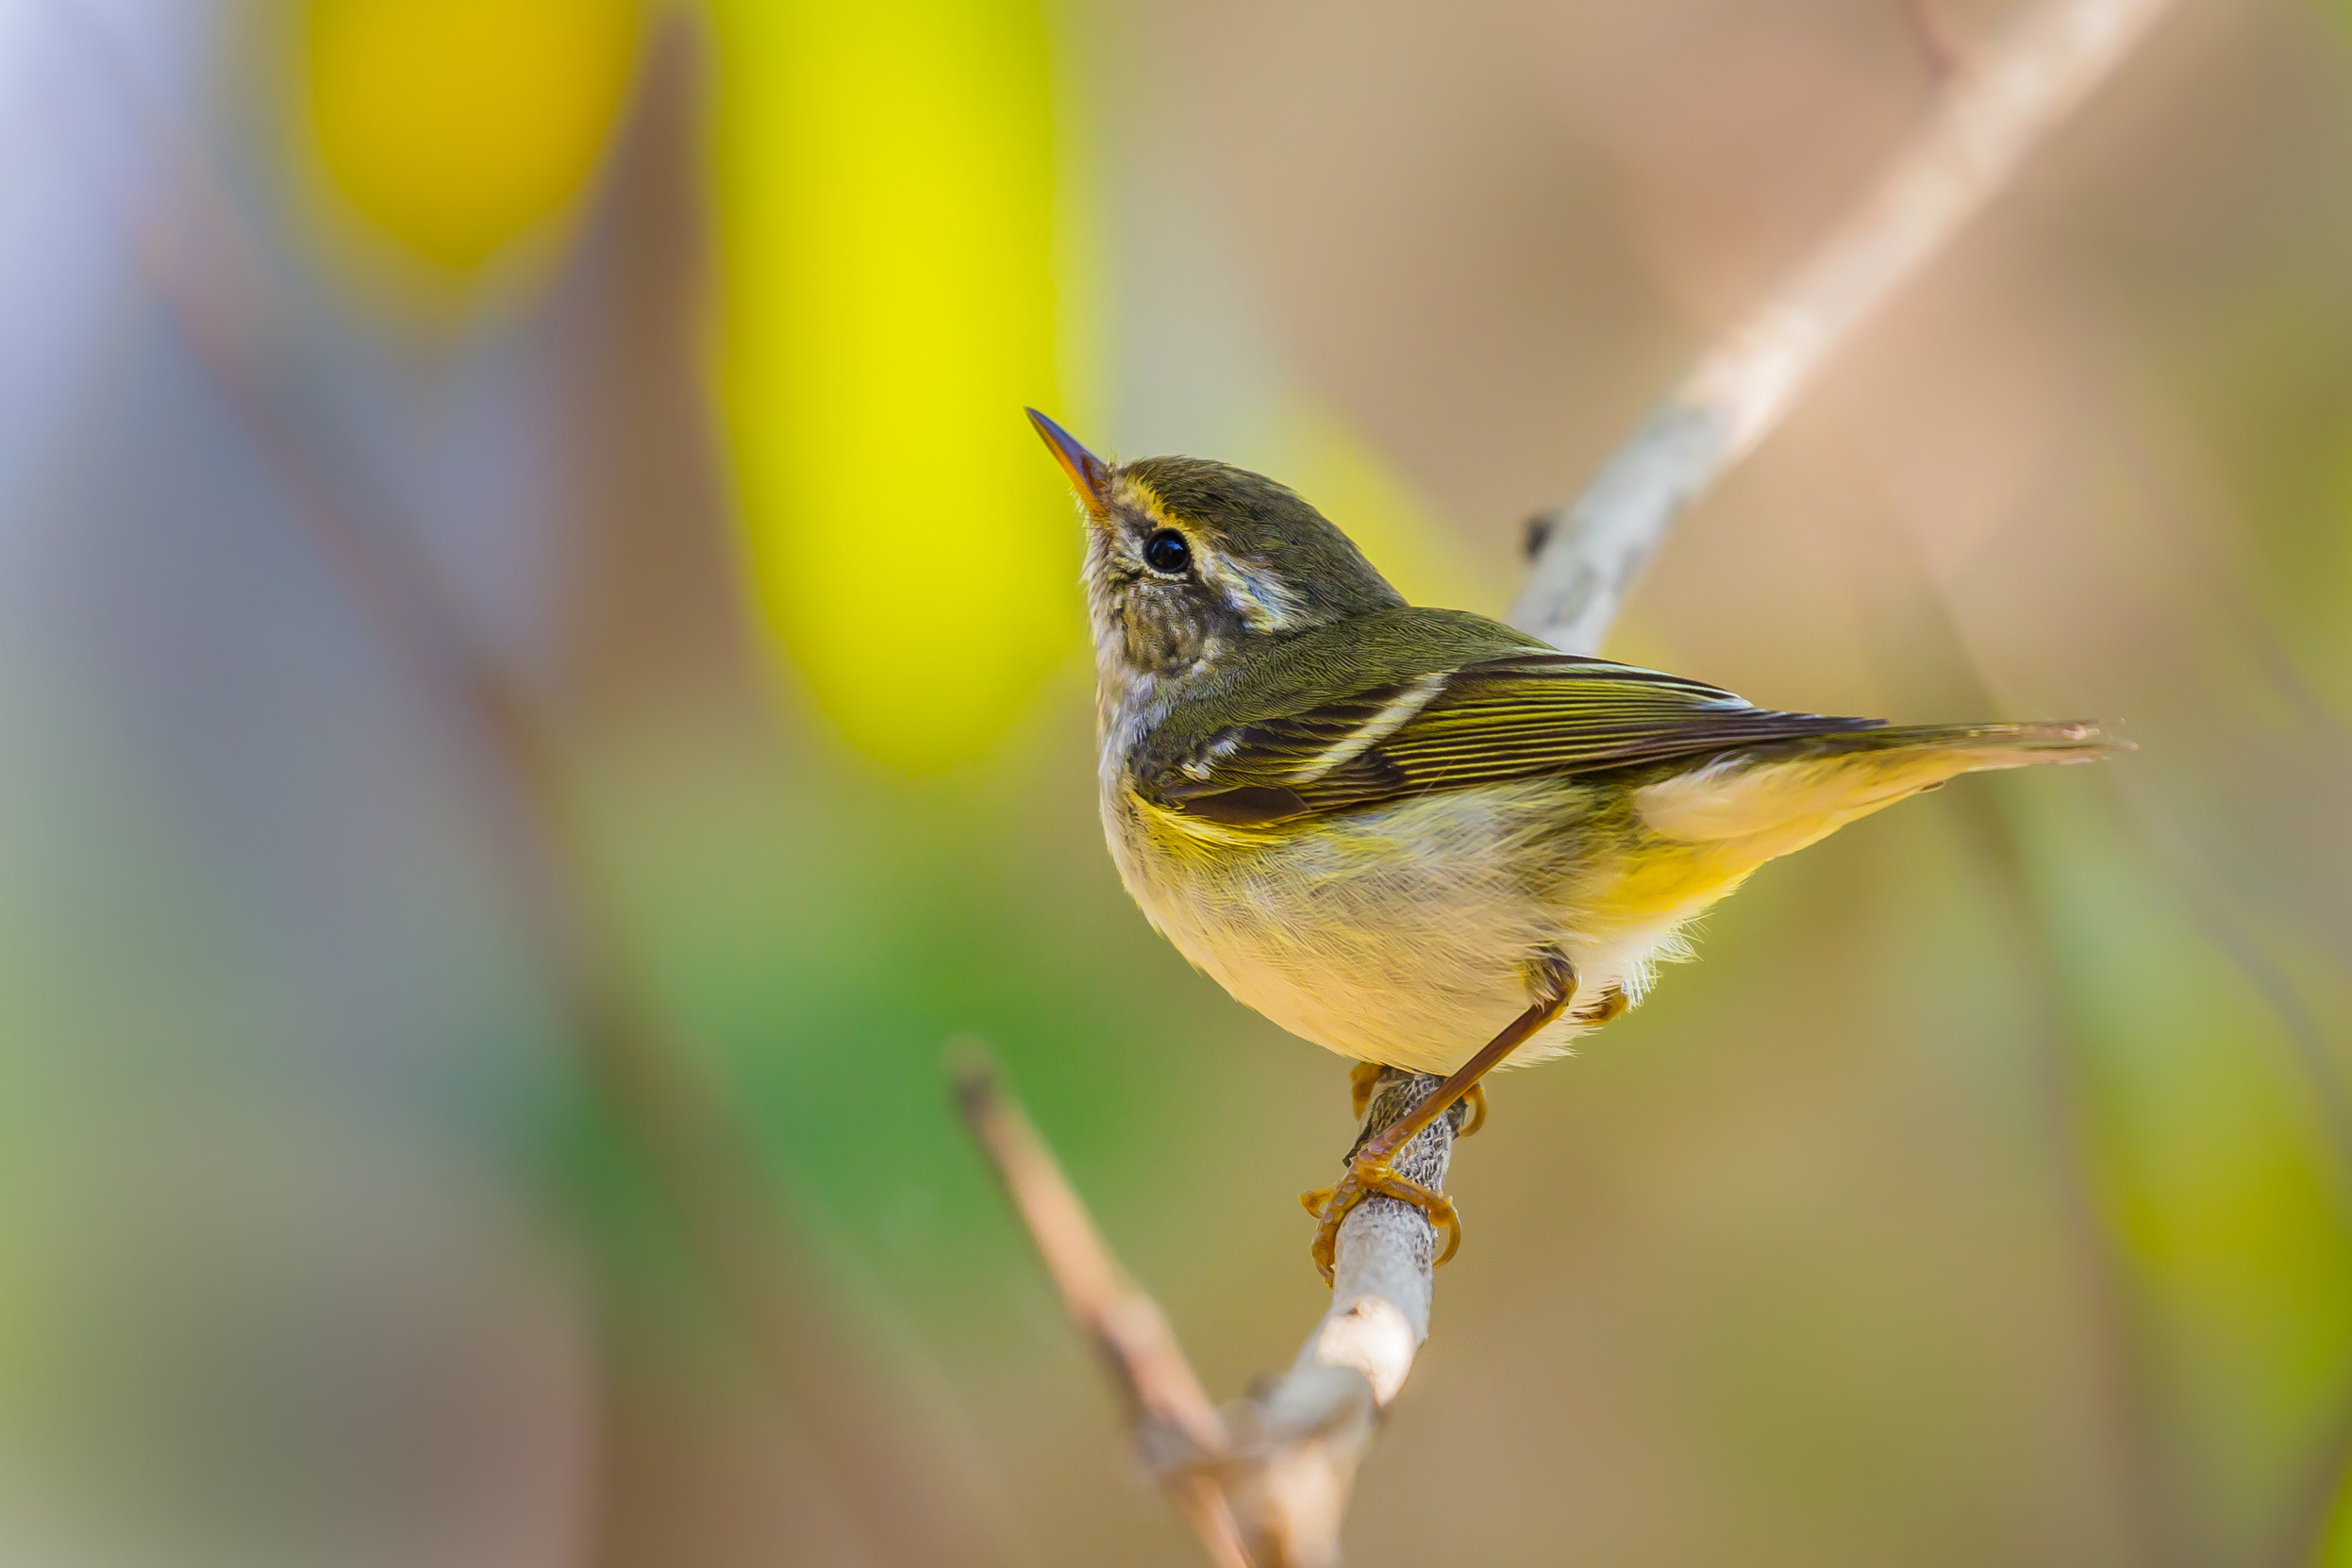 A Yellow-browed Warbler perched on a branch under leaves looking upwards.